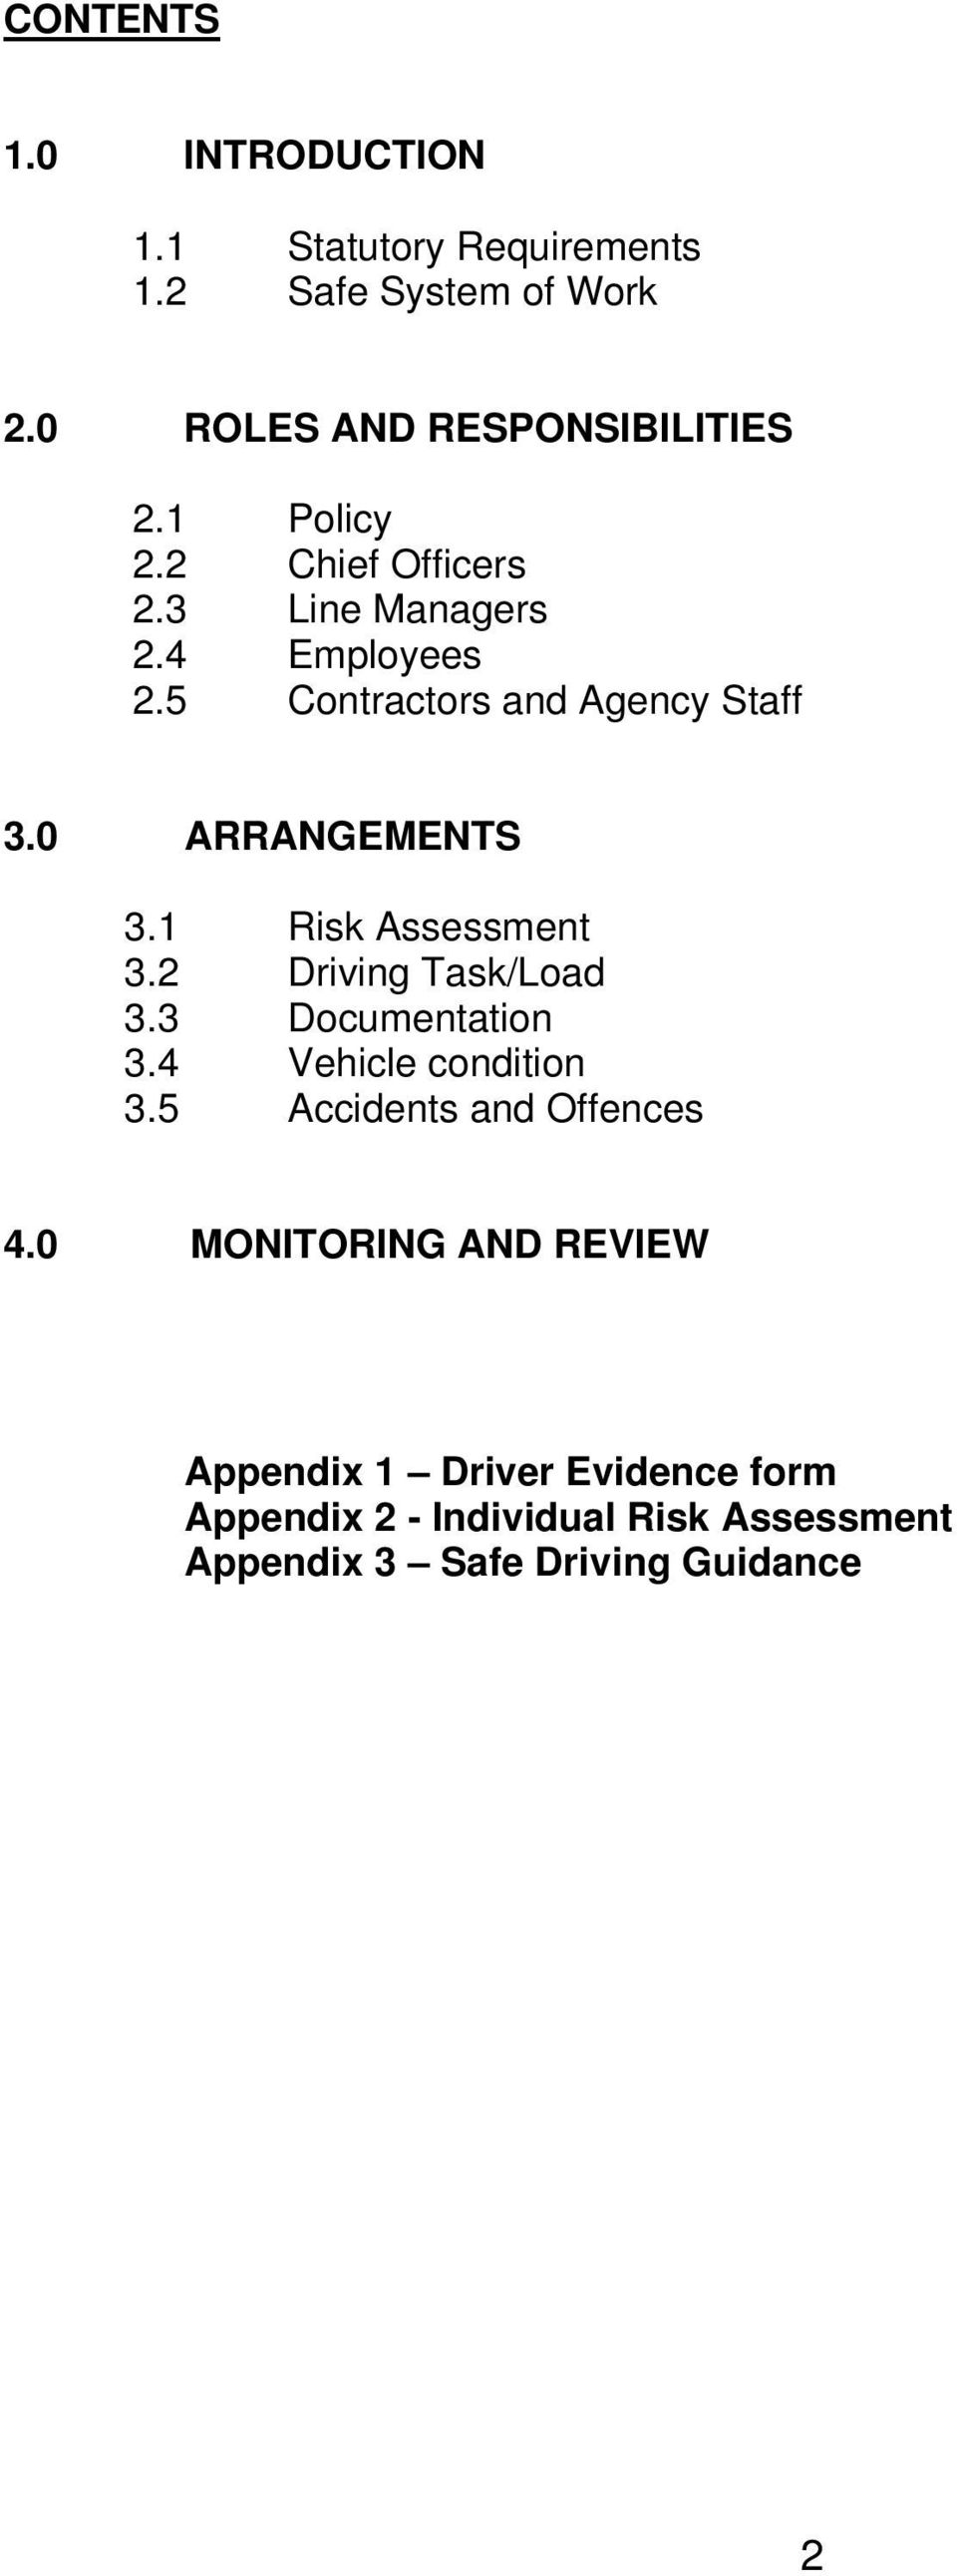 1 Risk Assessment 3.2 Driving Task/Load 3.3 Documentation 3.4 Vehicle condition 3.5 Accidents and Offences 4.